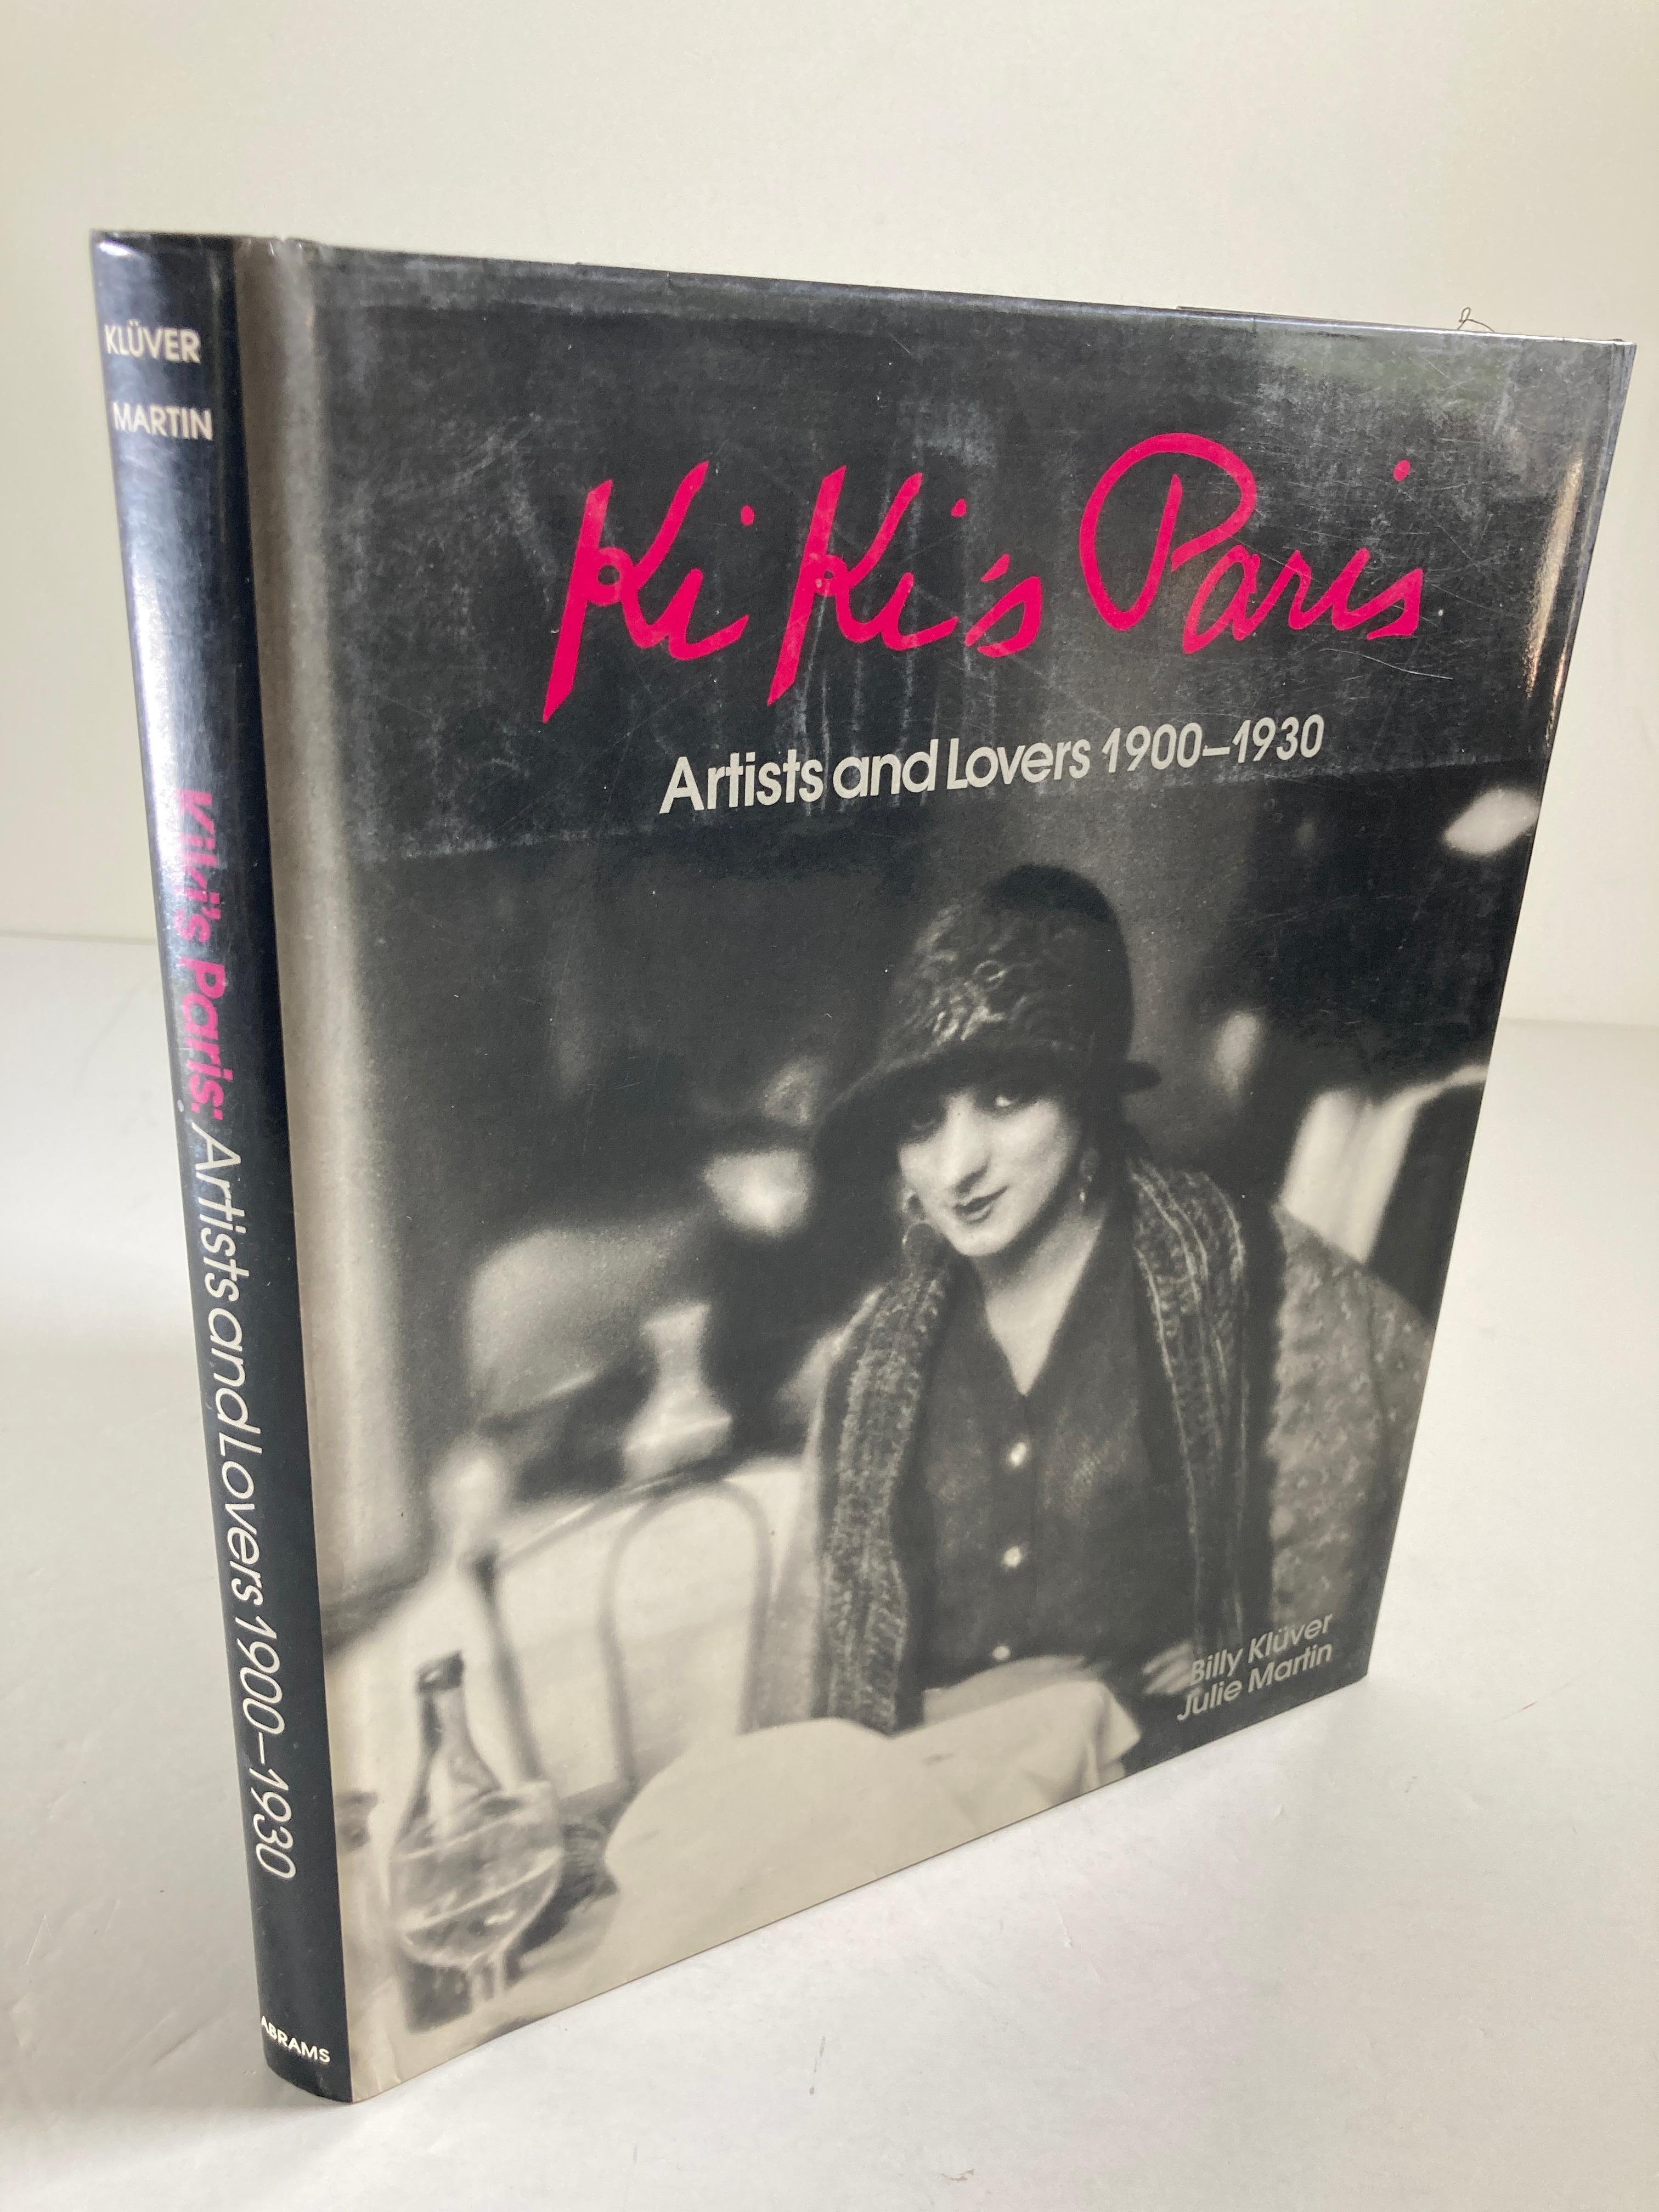 Kiki's Paris: Artists and Lovers 1900-1930.
Billy Klüver, Billy Klèuver, Julie Martin
Abrams, 1989 - History - 263 pages.
1st edition hardcover with dust jacket. 263 pp. An illustrated re-creation of life in the tumultuous world of 1900-1930